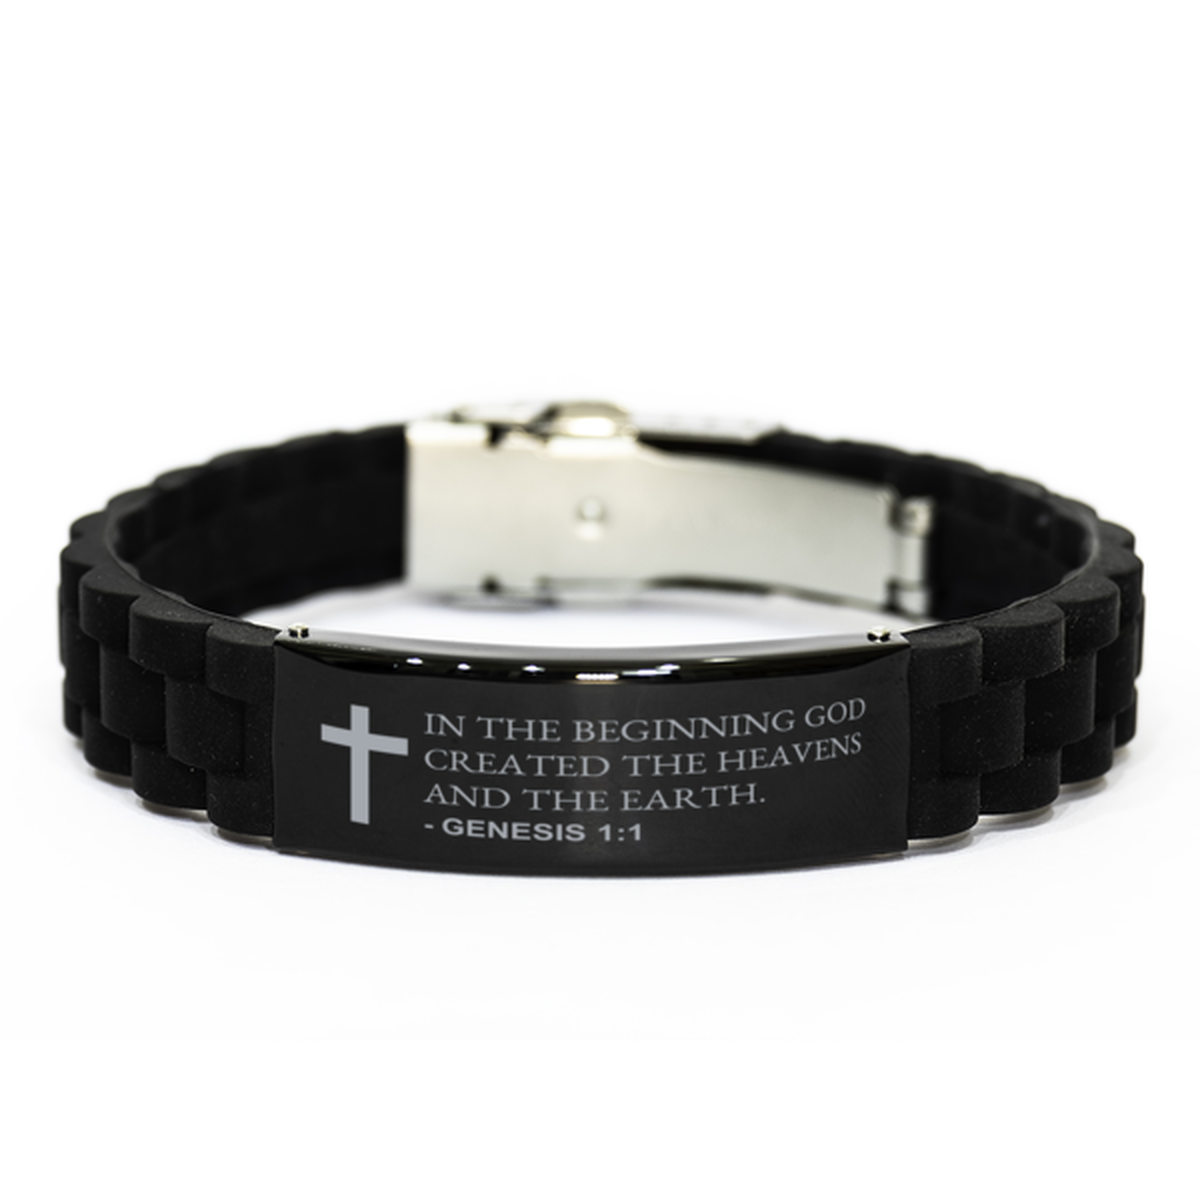 Bible Verse Black Bracelet,, Genesis 1:1 In The Beginning God Created The Heavens And The, Inspirational Christian Gifts For Men Women